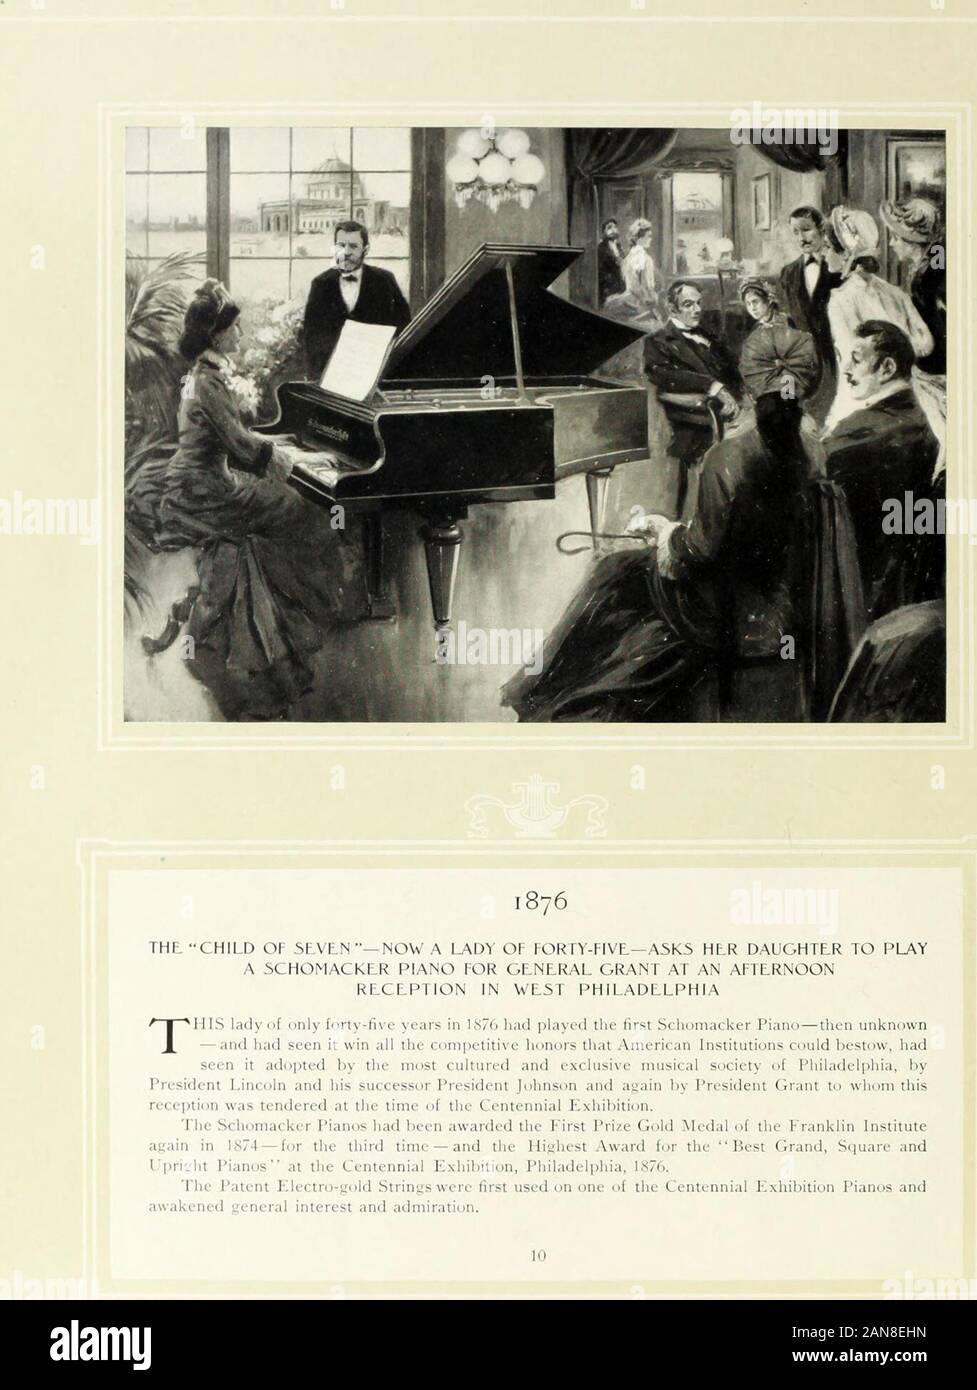 Catalogue of Schomacker grand and upright pianos and the Schomacker Angelopian player-piano . PIANO AT THL WHITL HOU5L FOR PRL5IDLNT LINCOLN THE vrars fn.m 1 s5s to lN&lt;o s.vvv imt ..nlv tlu- m. .st moiiu-ntous in tlic [...litirai liistxrv nf .,urr.mntr l.ui ^1 rxtr.,-nln,.,rx imp, iftati, .- in ilu- ,lcvc-l(.pment ..f musical interest an.rniusical Mans cnii-rtinns unv in tl.r field u h,, ,l)alli-n^c. I tlie sn|-ivniac v , .f tlu- plan., which vv,.u suchconspicuous honors in 1S4.=;, 1S4,S, 1S5J and 1 S.SS, hut thr S, lio,,iae,h .l the o, t.ejon, aud the hirue. Square register and amplitied Stock Photo